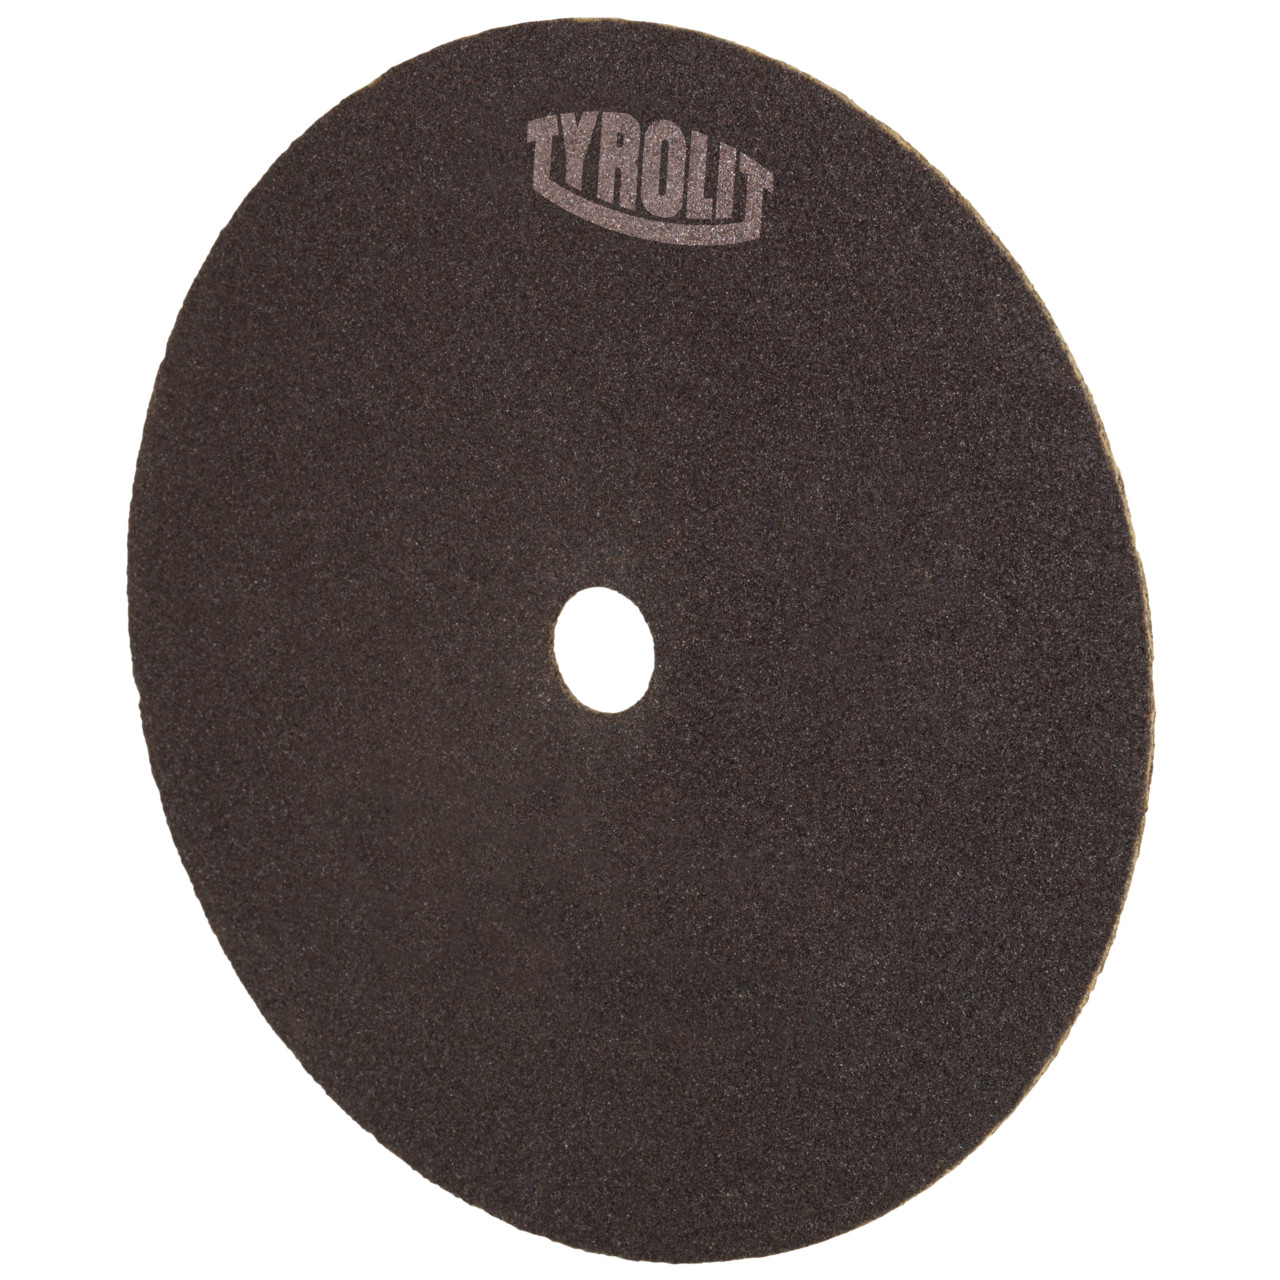 TYROLIT cut-off wheel for cutting and saw sharpening DxDxH 200x1.5x32 For steel and HSS, shape: 41N - straight version (non-woven cut-off wheel), Art. 282114